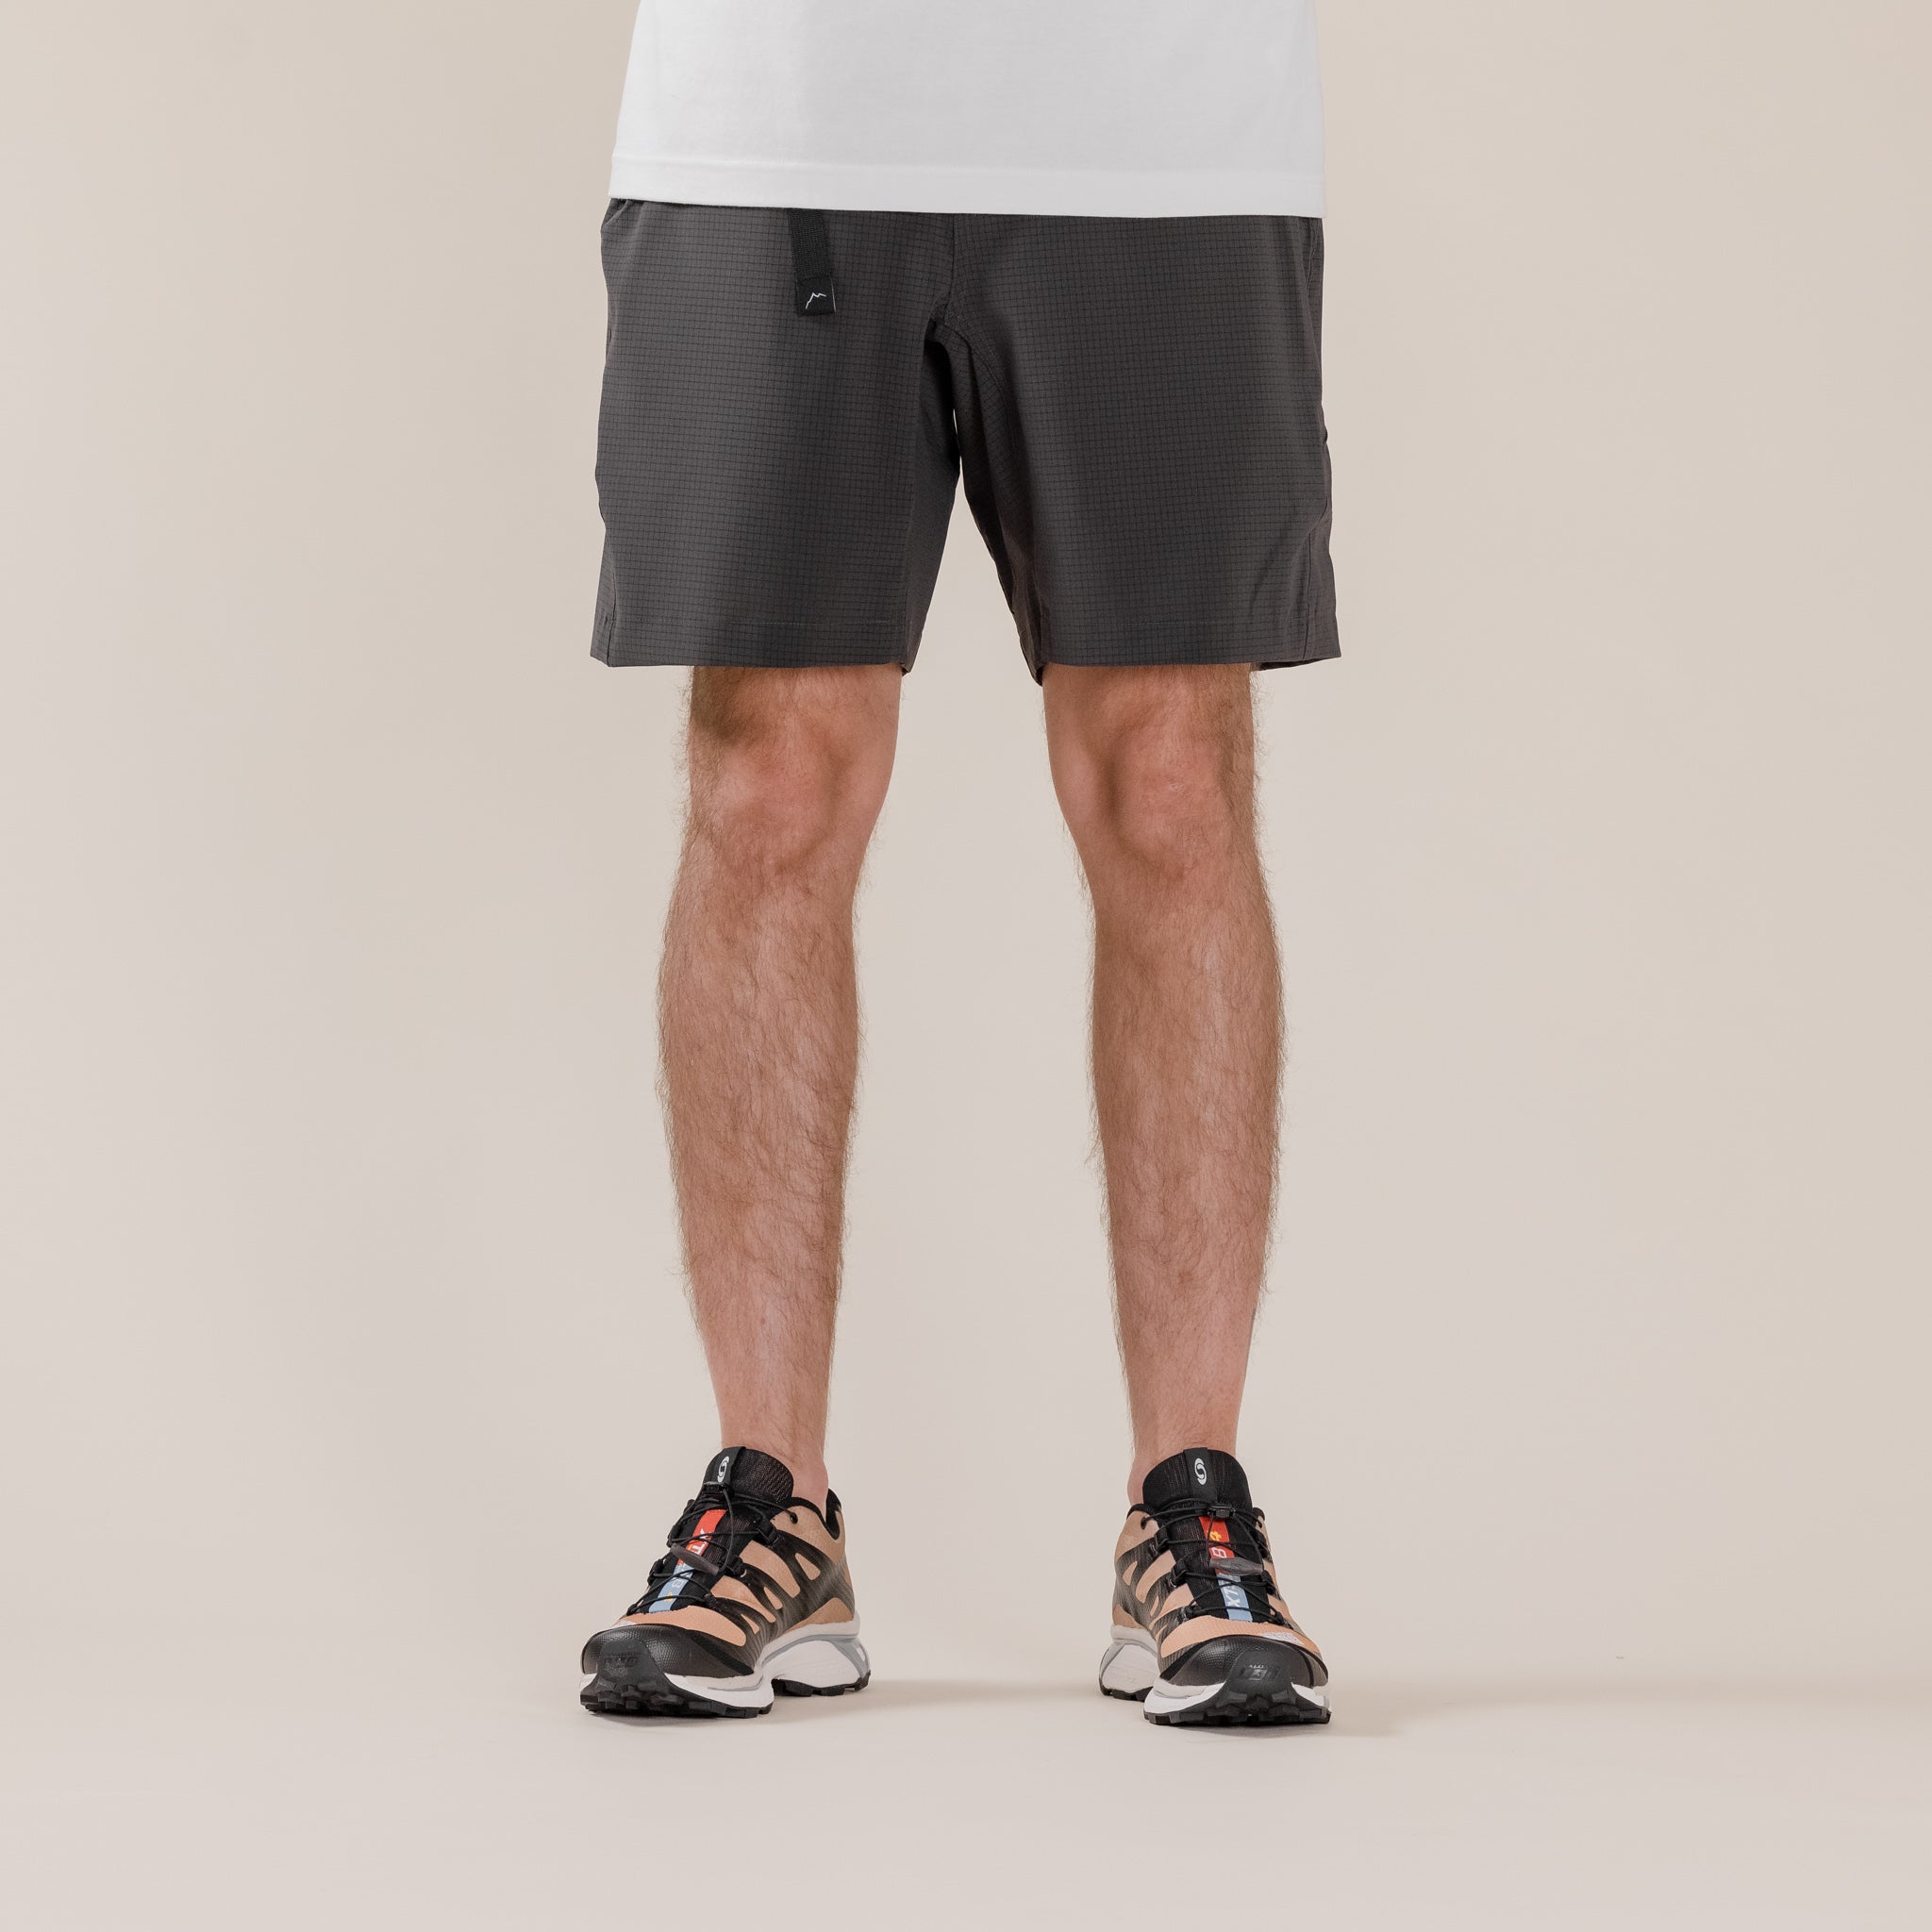 CAYL "Climb As You Love" - Flow Shorts - Charcoal Grey UK USA Stockist Best Price